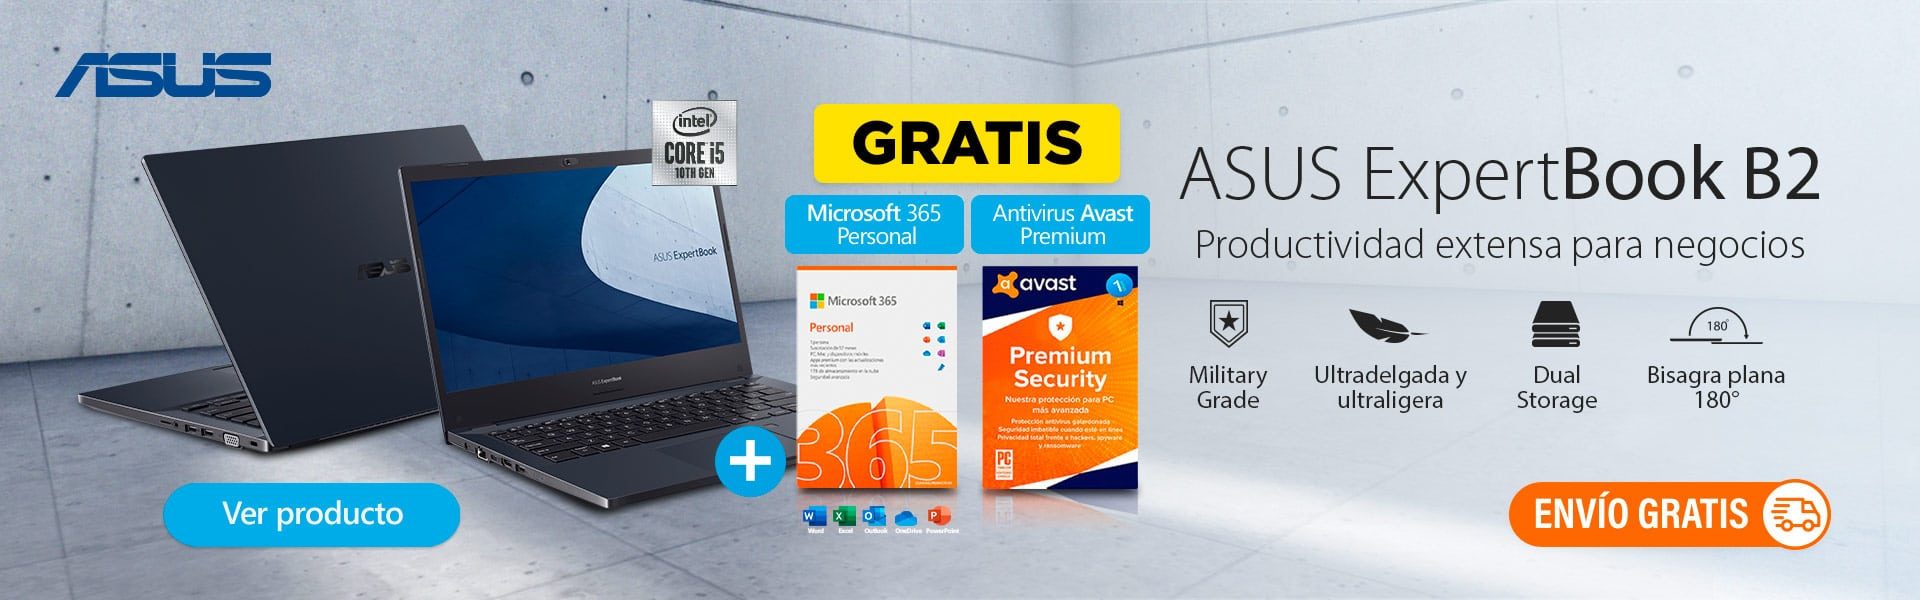 Banner_Home_Asus_laptop_expertbook_microsoft_365_personal-2